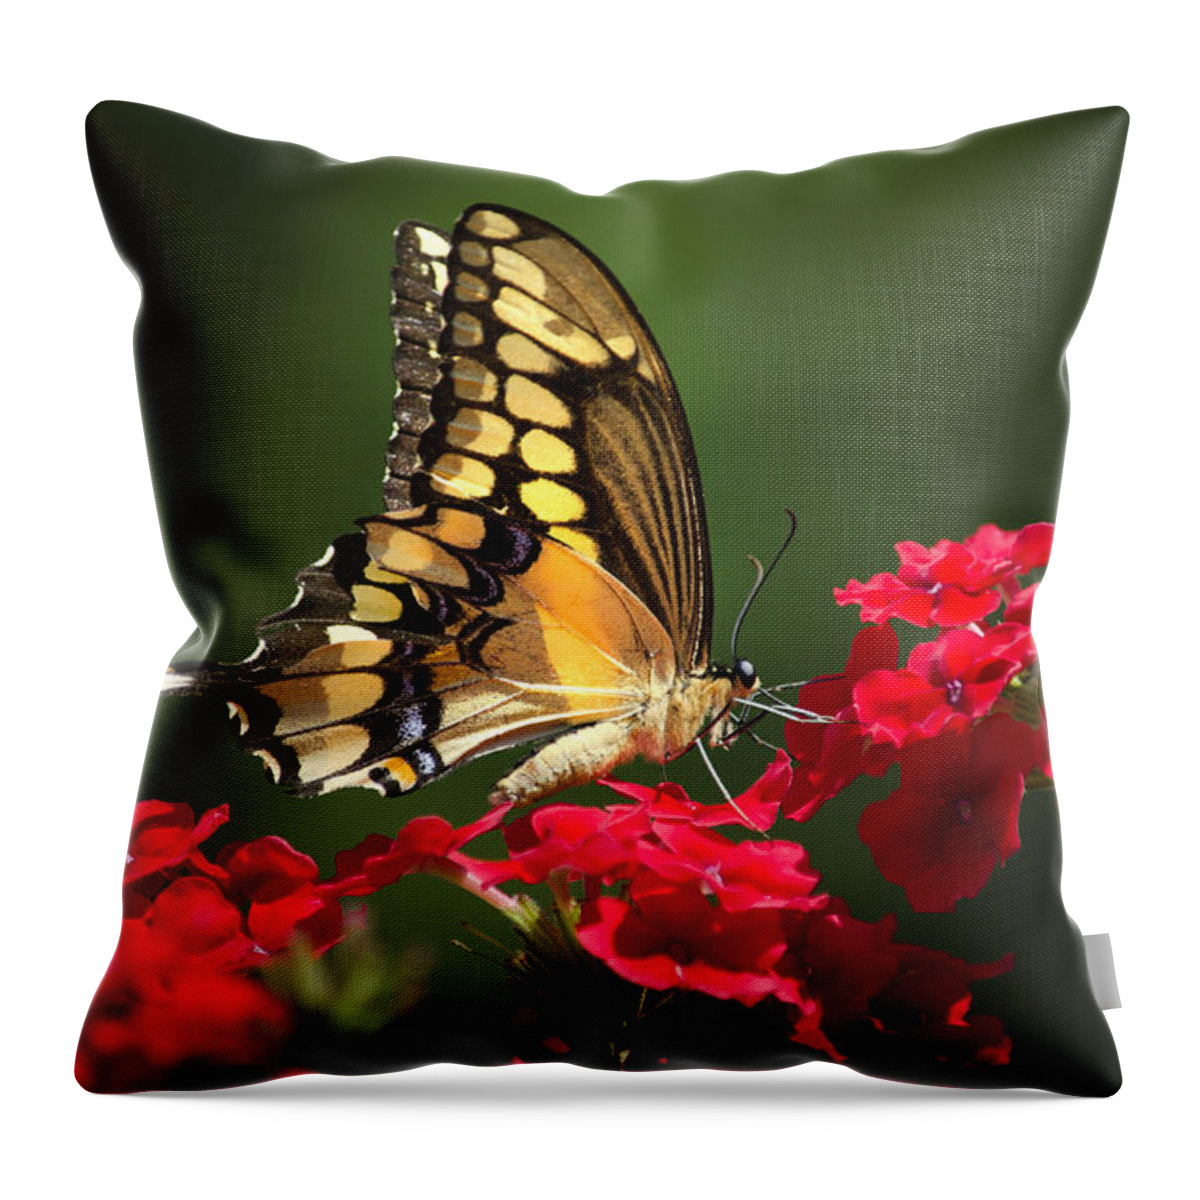 Butterfly Throw Pillow featuring the photograph Giant Swallowtail Butterfly by Christina Rollo